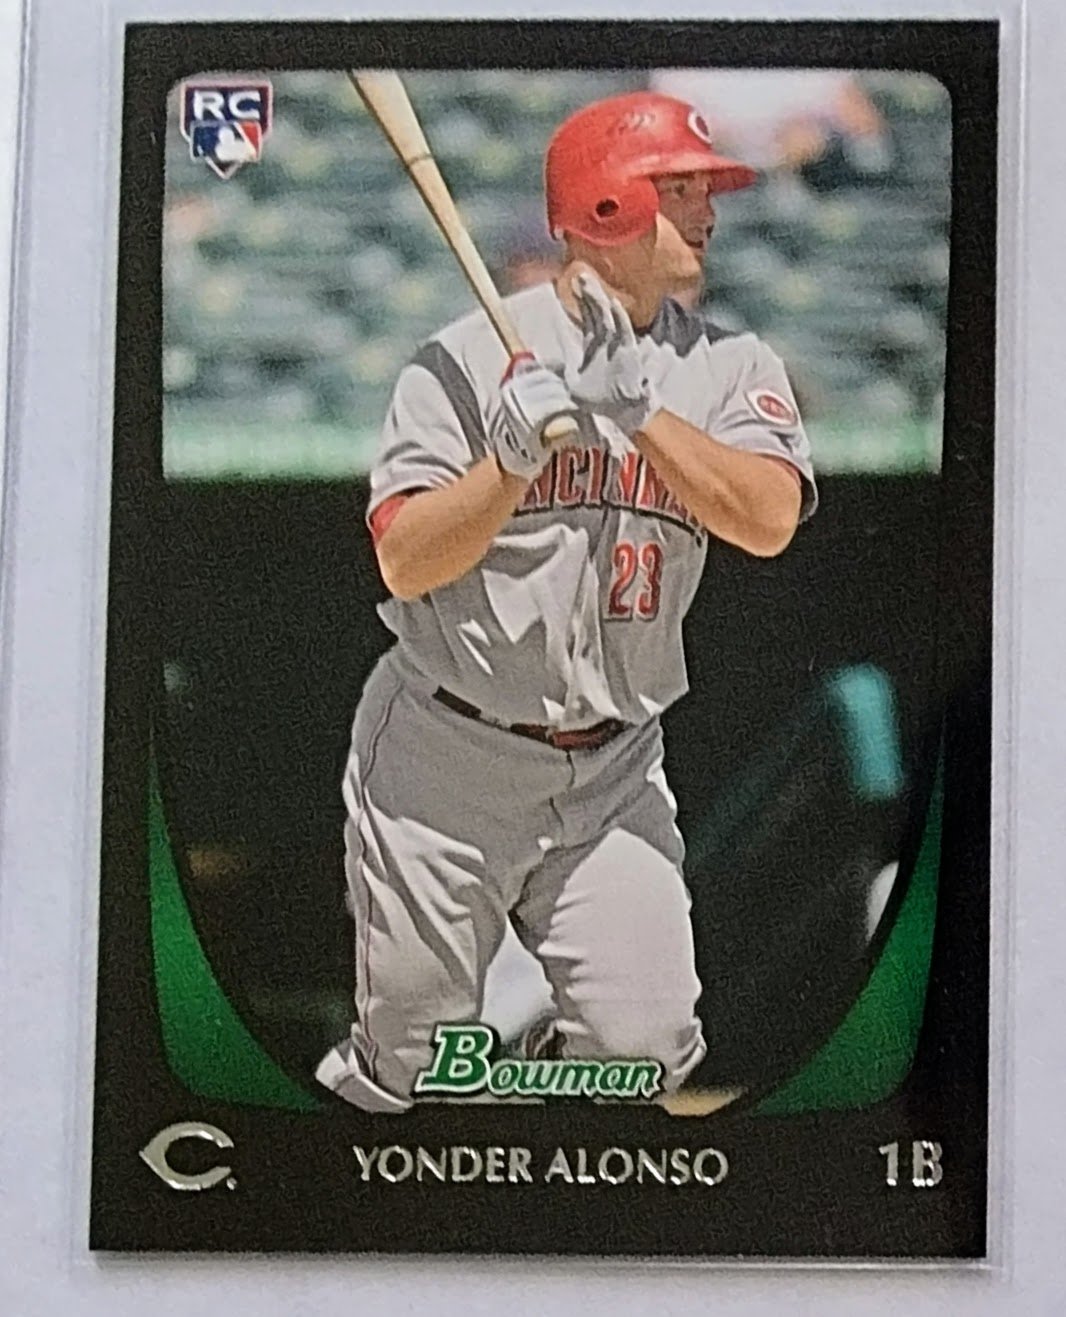 2011 Bowman Yonder Alonso Rookie Baseball Card TPTV simple Xclusive Collectibles   